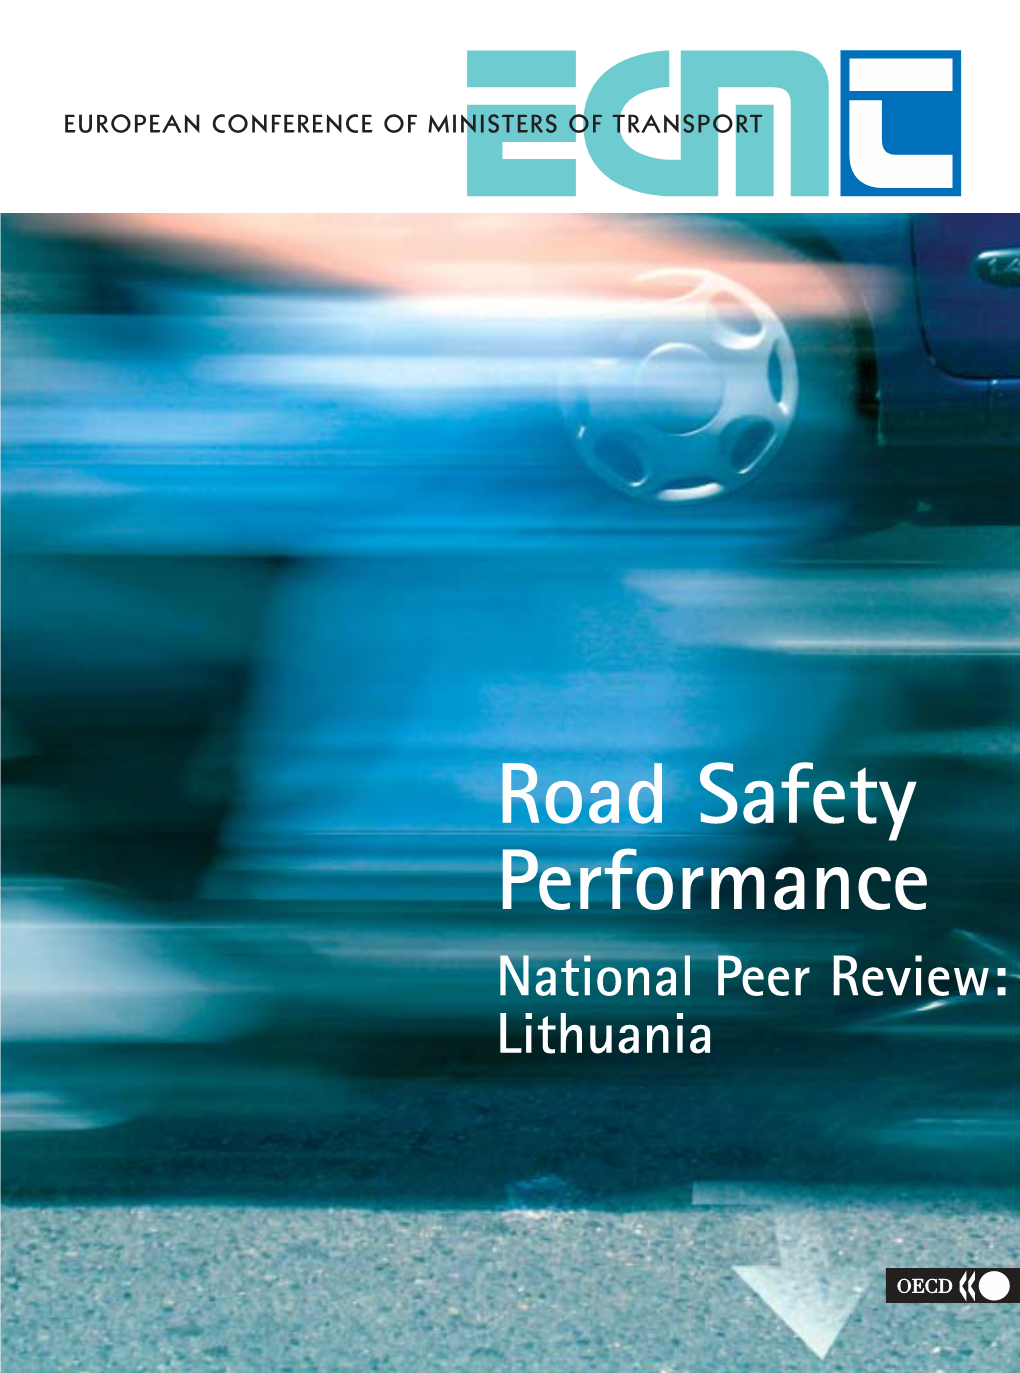 Road Safety Performance Road Safety Performance Review of Lithuania National Peer Review: Lithuania